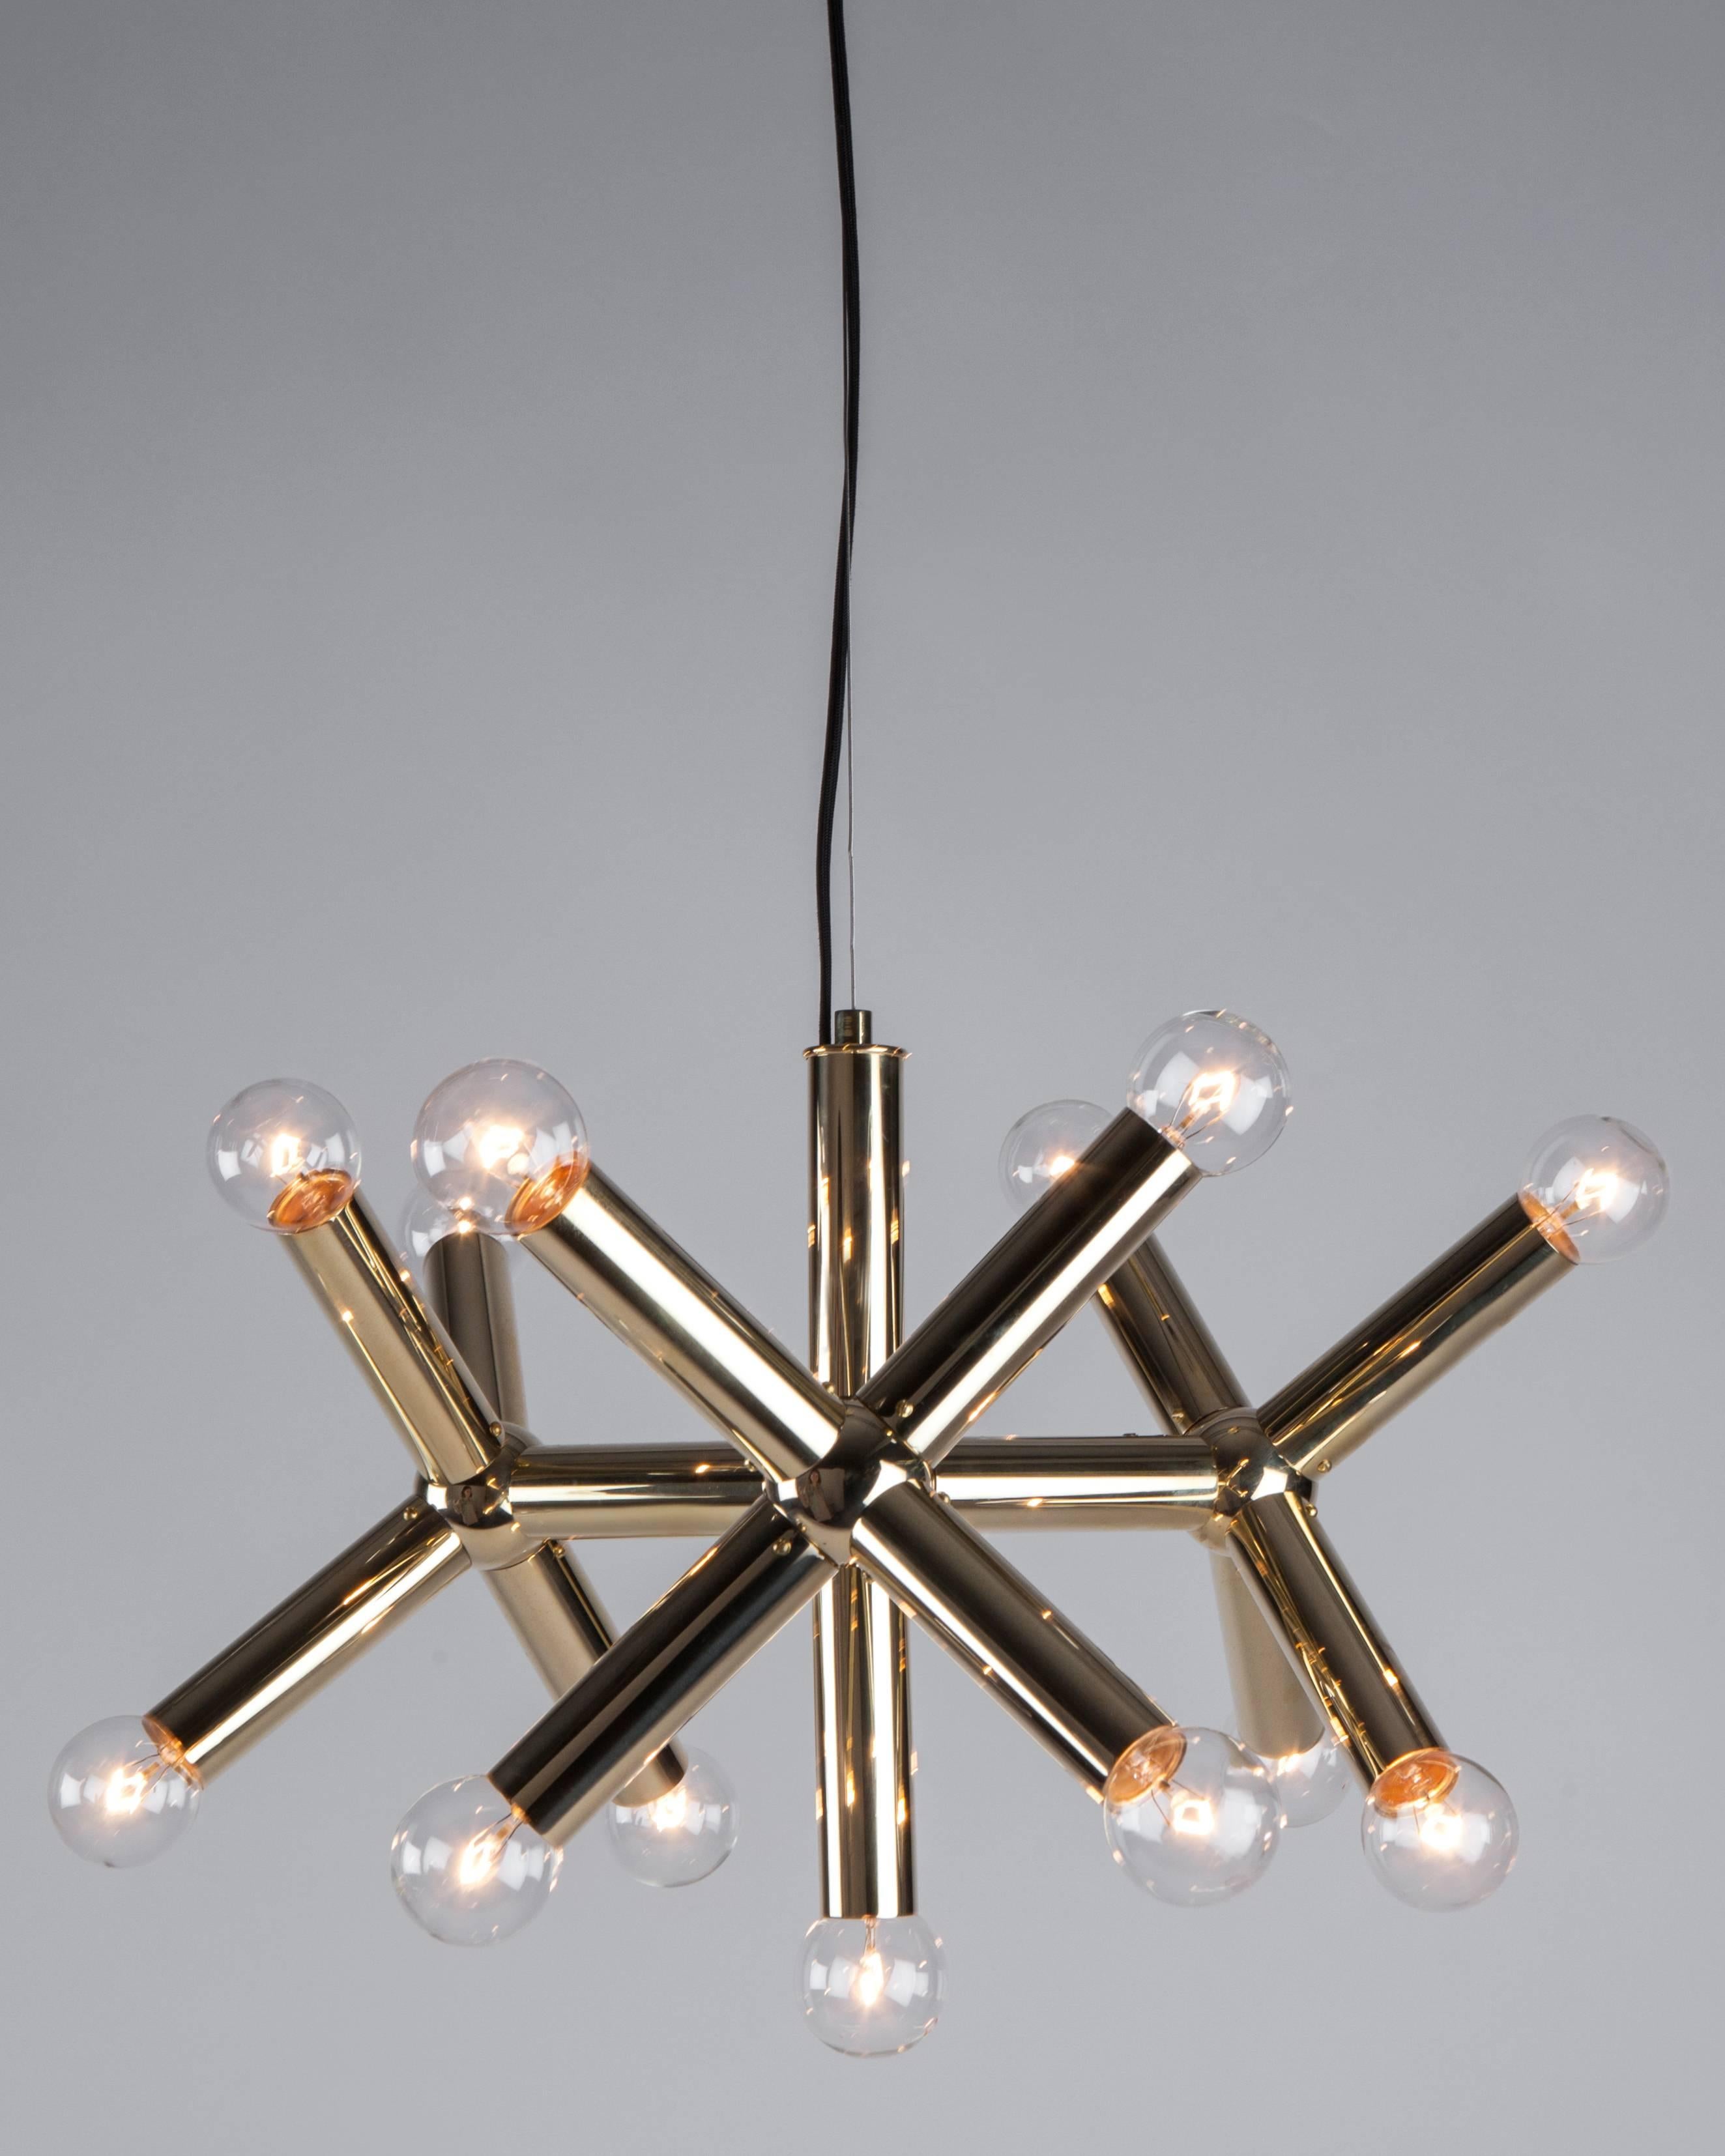 HHL6120
Inspired by the original midcentury Atomic Lichtstruktur designs of Swiss architect Robert Haussmann, built in 1965 for the Ingolstadt Theater. The solid brass sphere and four round bars, each ending in a point of light, are suspended from